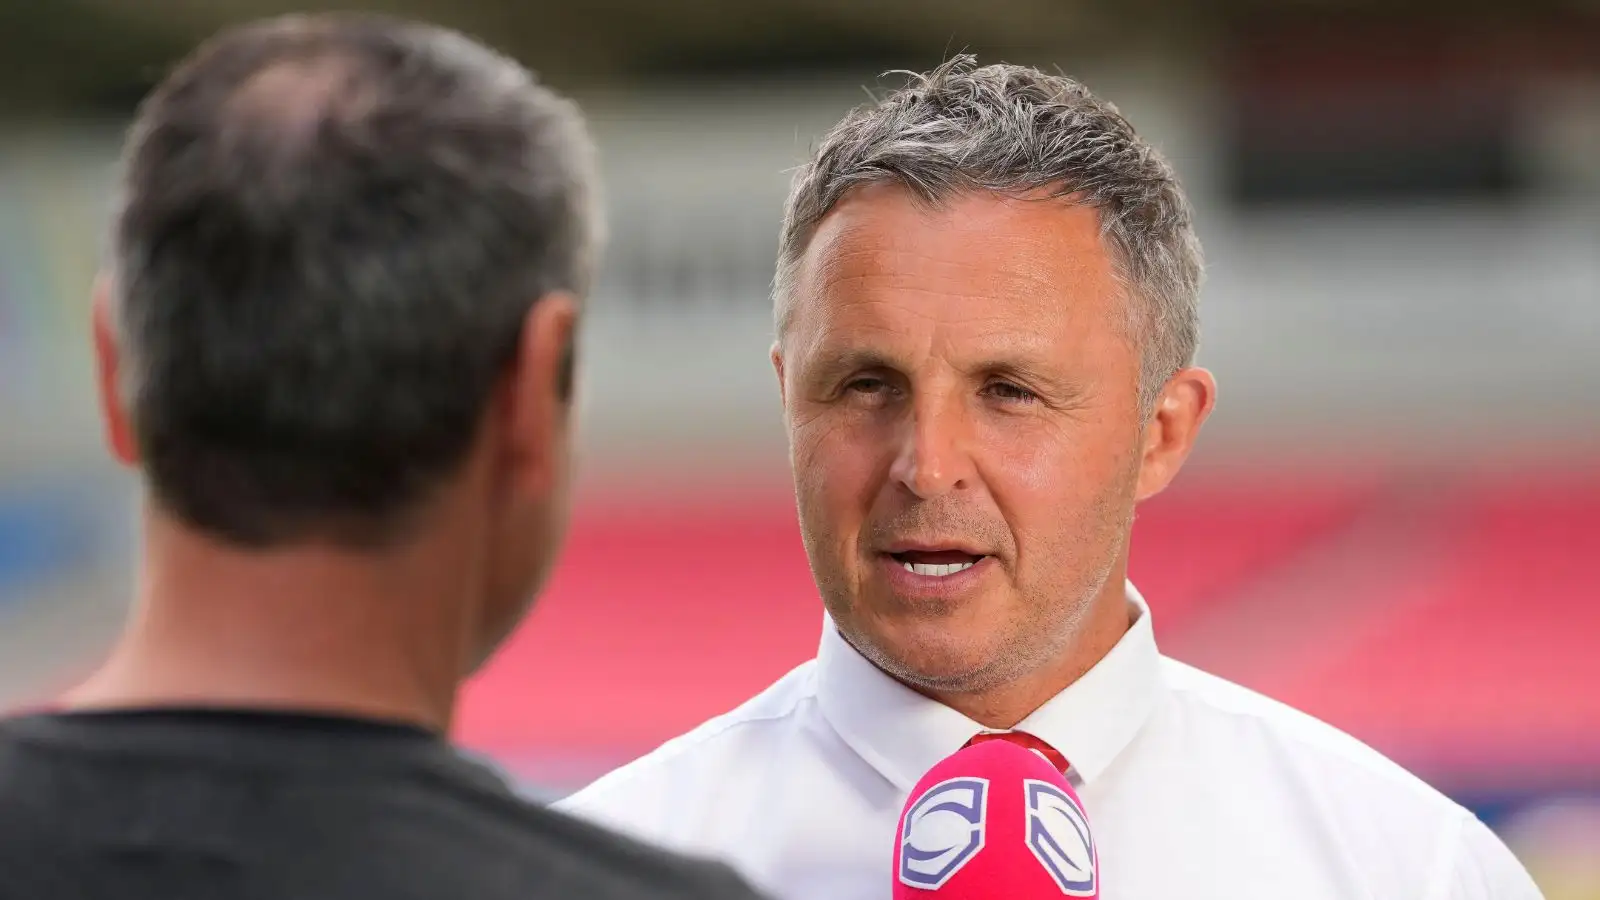 Paul Rowley on how Salford Red Devils can turn fortunes around, discusses Super League permutations